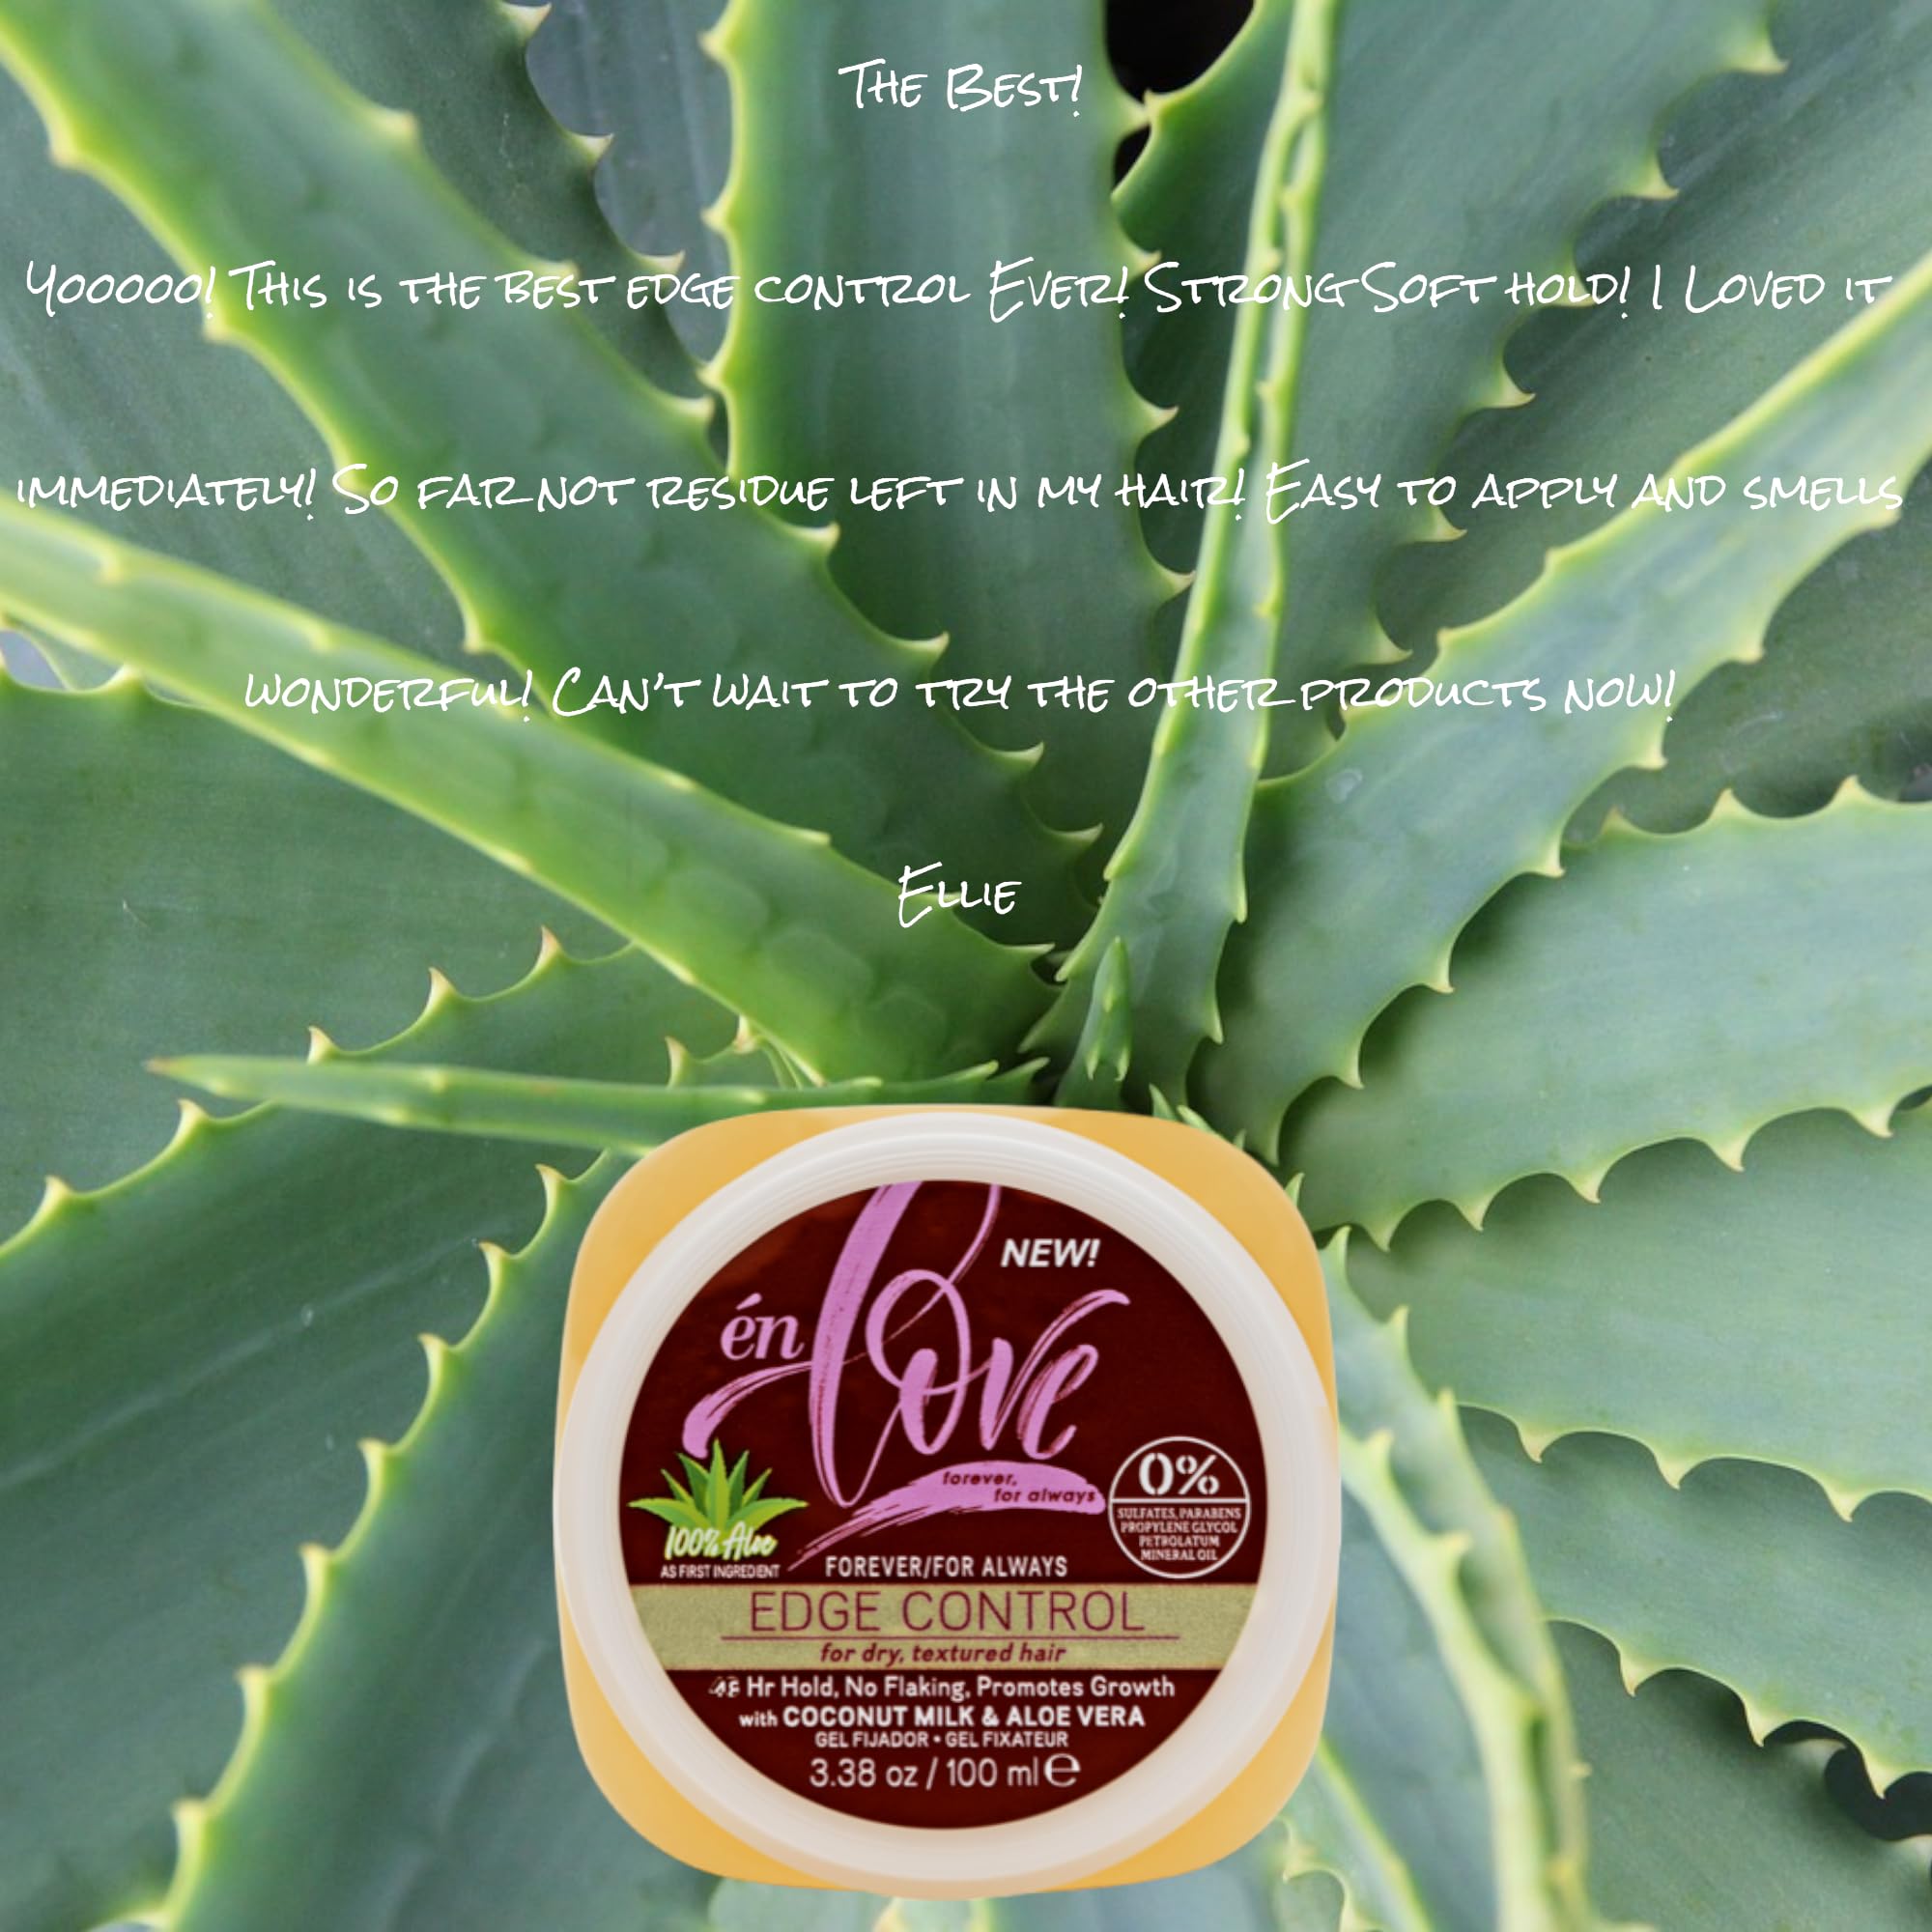 én Love Forever for Always Edge Control Hair Gel with Natural Coconut Milk, Pure Aloe Vera and Argan Oil | 48 Hours Extra Hold Pomade | Promotes Growth | No Flaking | Luminous Shine | 3.38oz